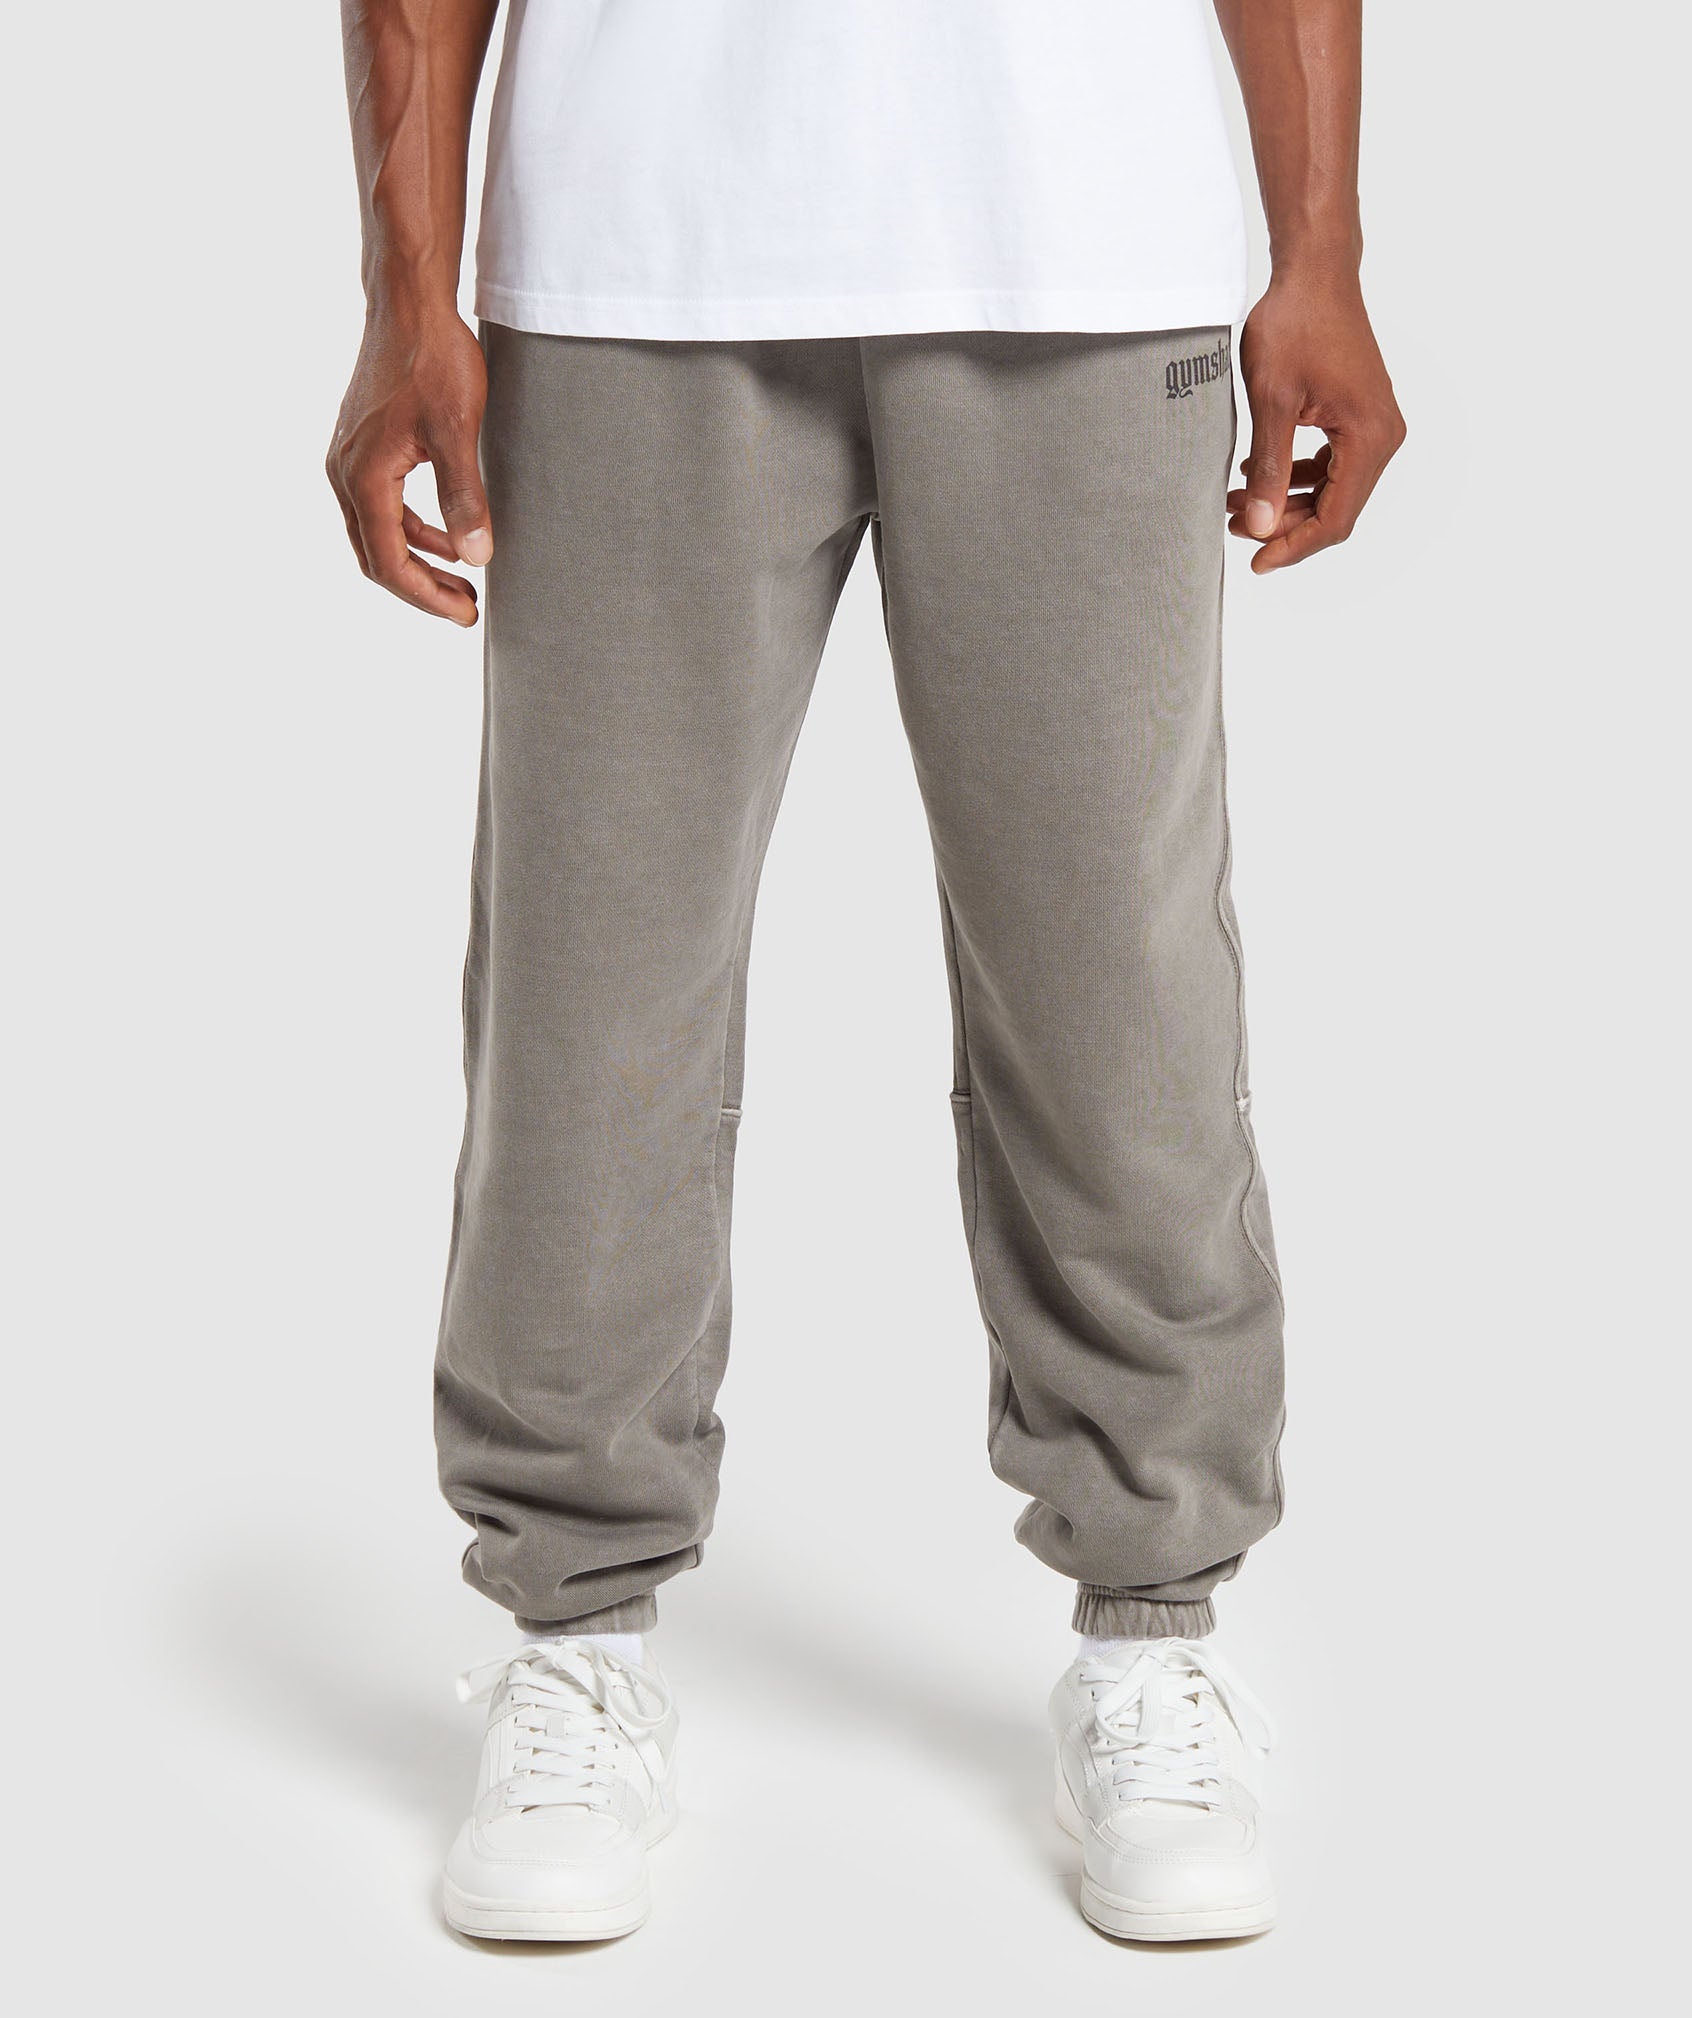 Rest Day Woven Oversized Joggers